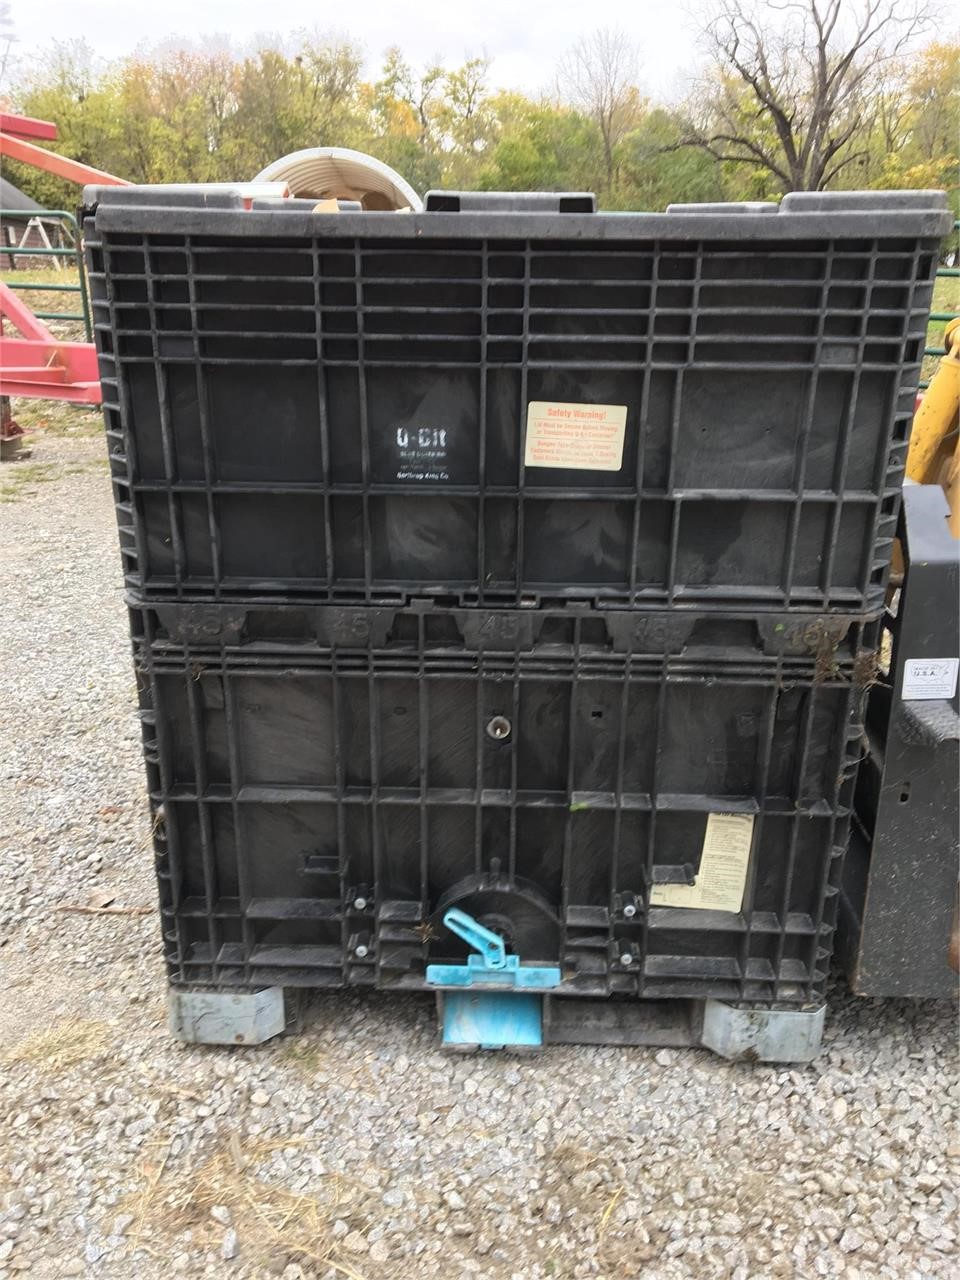 AuctionTime.com | Q-BIT SEED CONTAINER Online Auctions